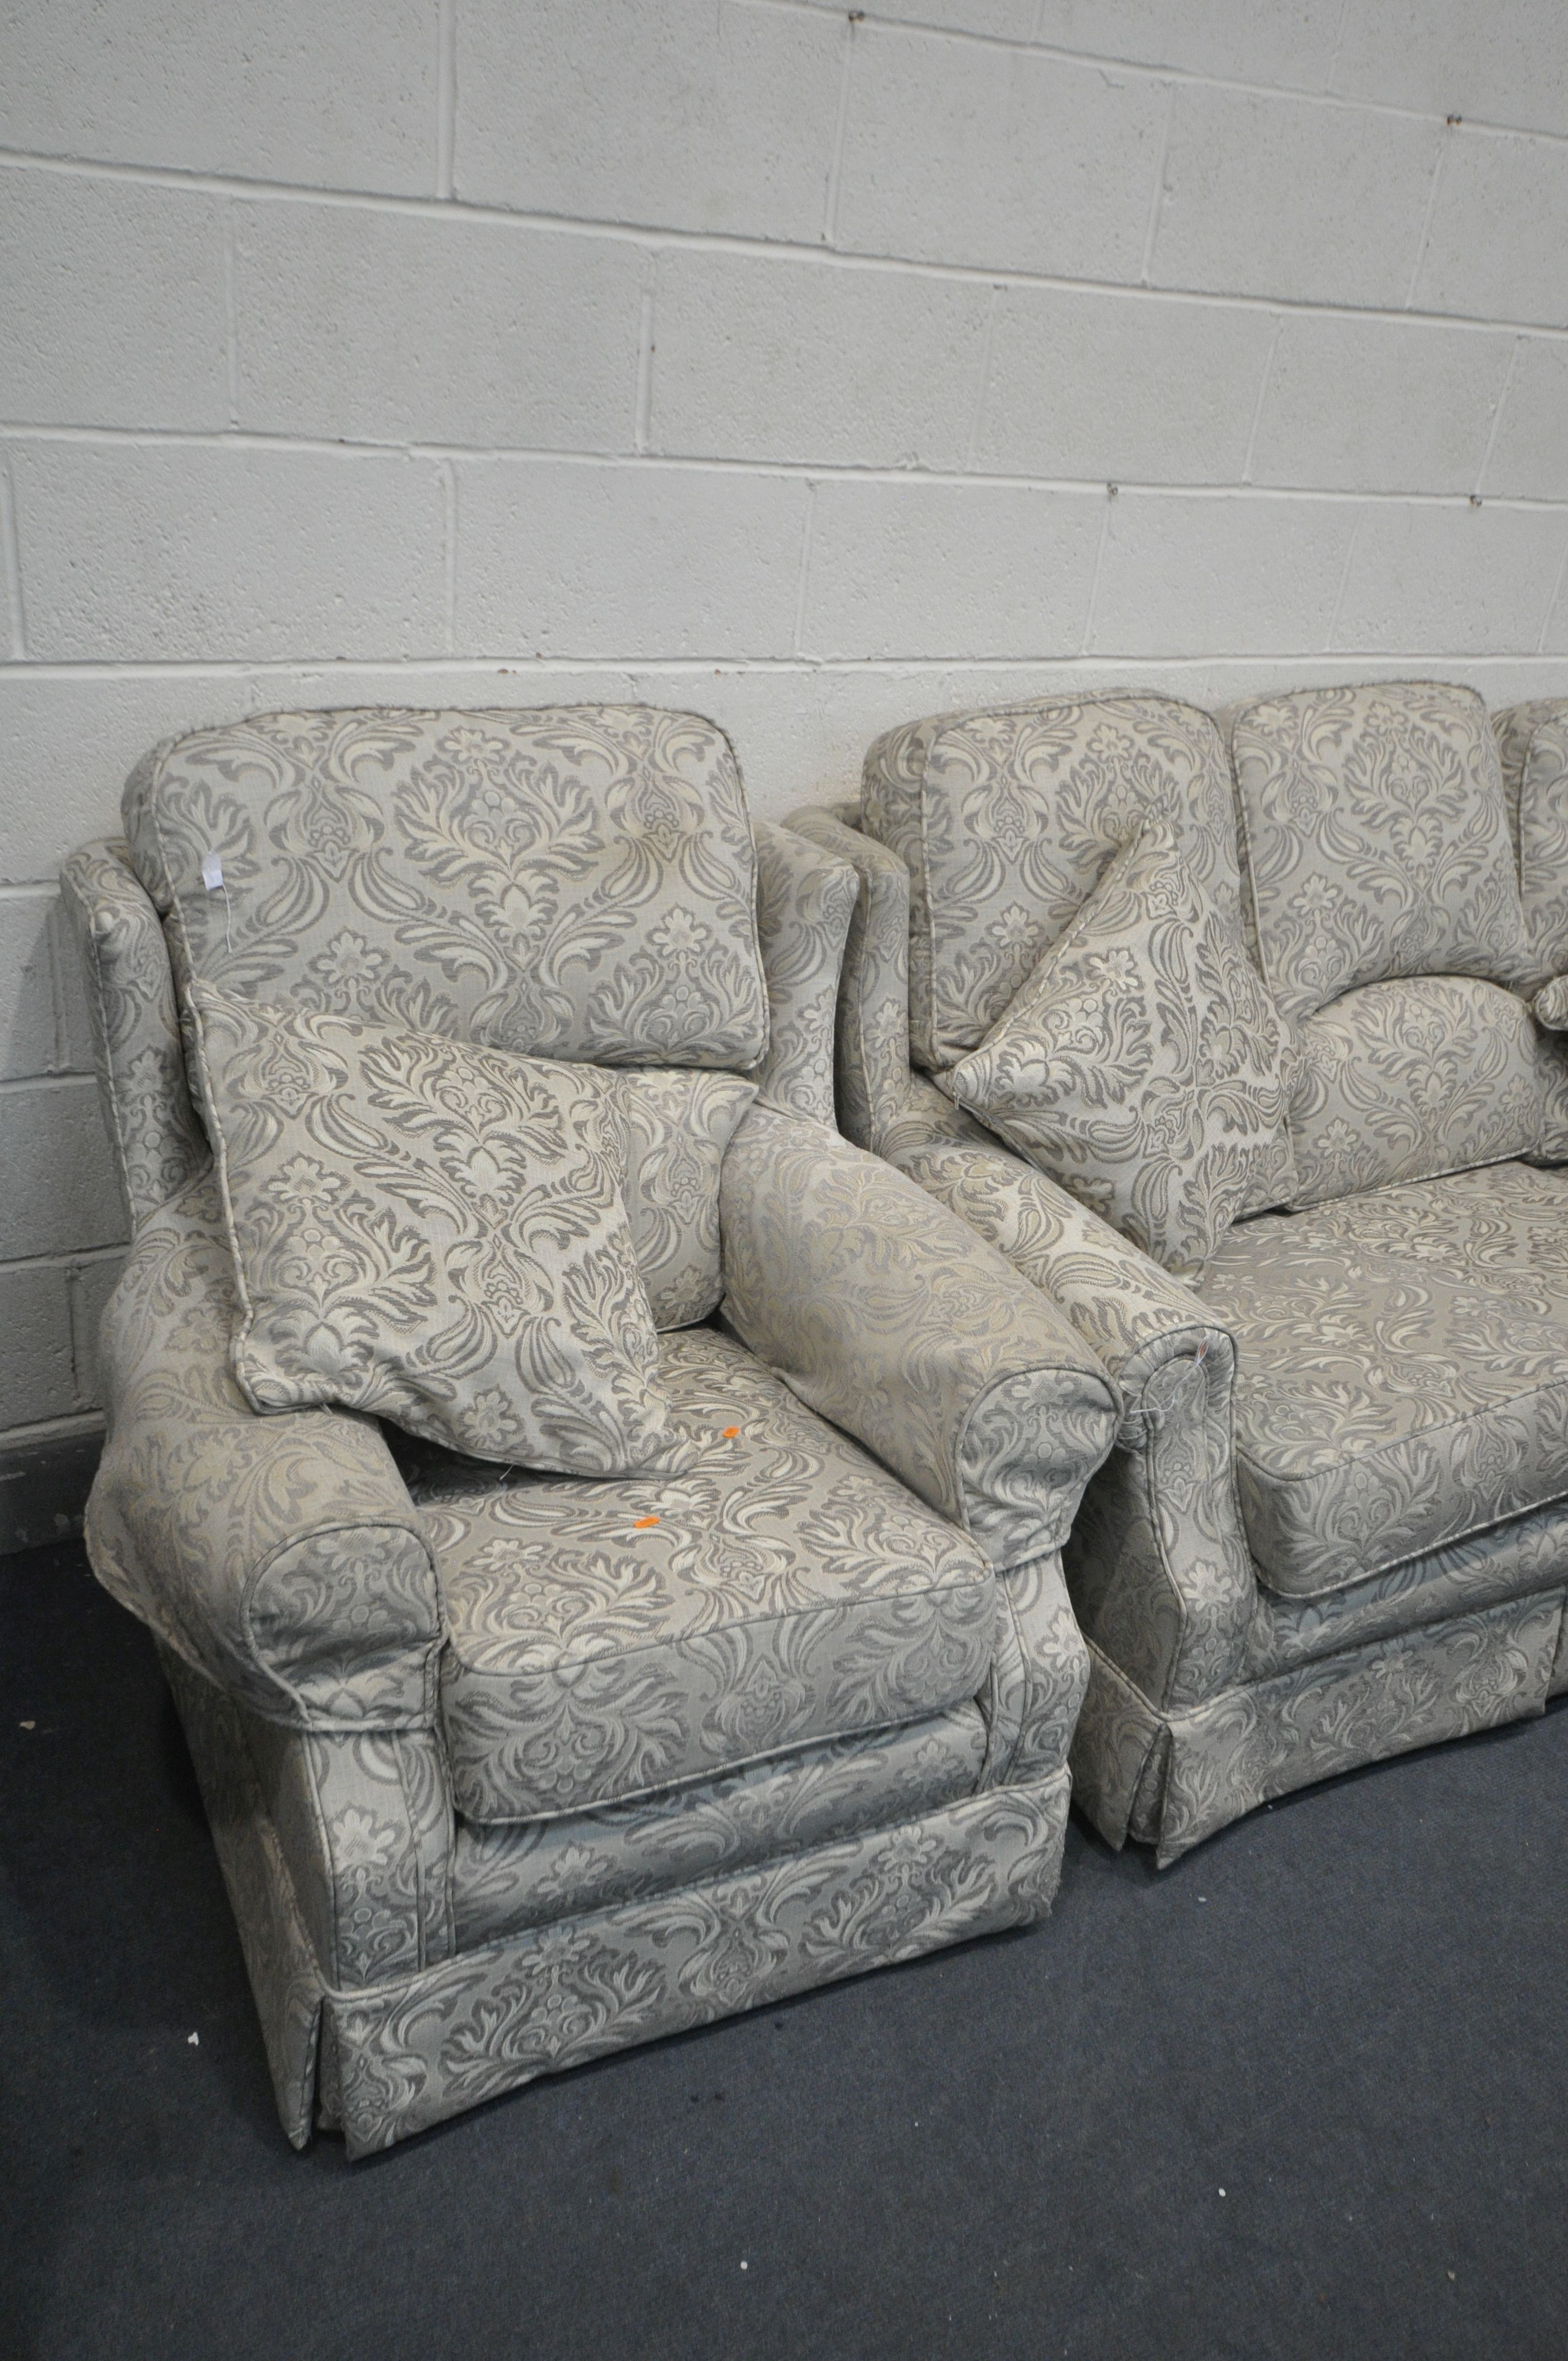 A FLORAL UPHOLSTERED THREE PIECE LOUNGE SUITE, comprising a three seater settee, and a pair of - Image 3 of 3